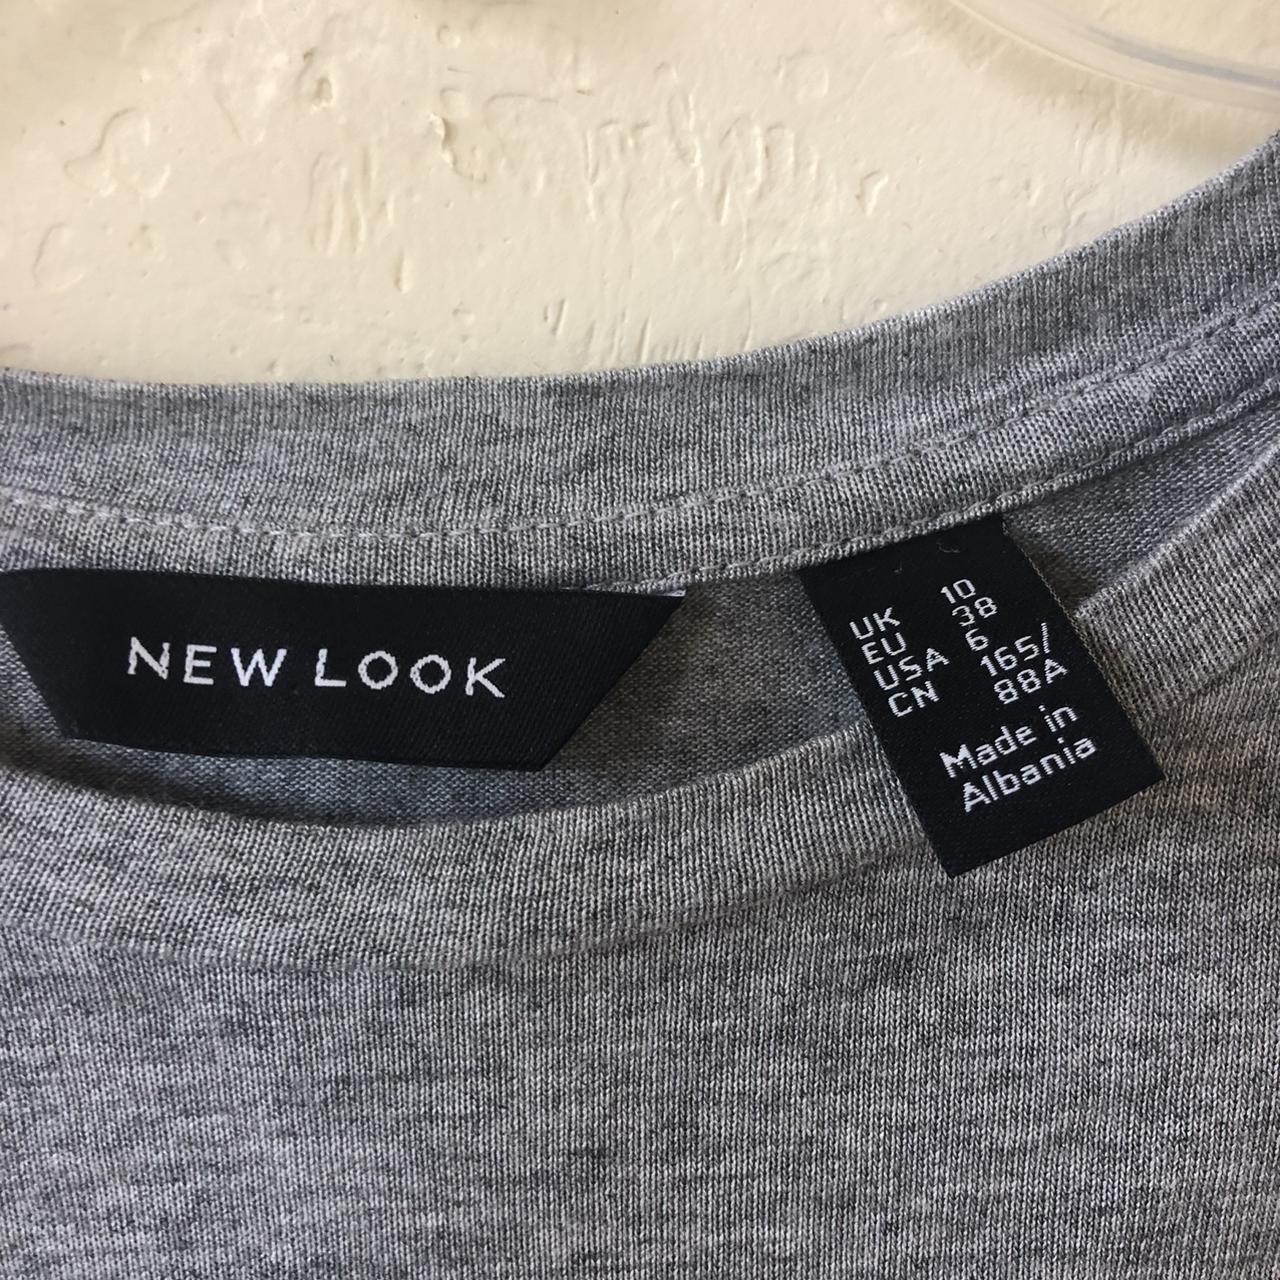 New Look Women's Grey and Pink T-shirt (4)